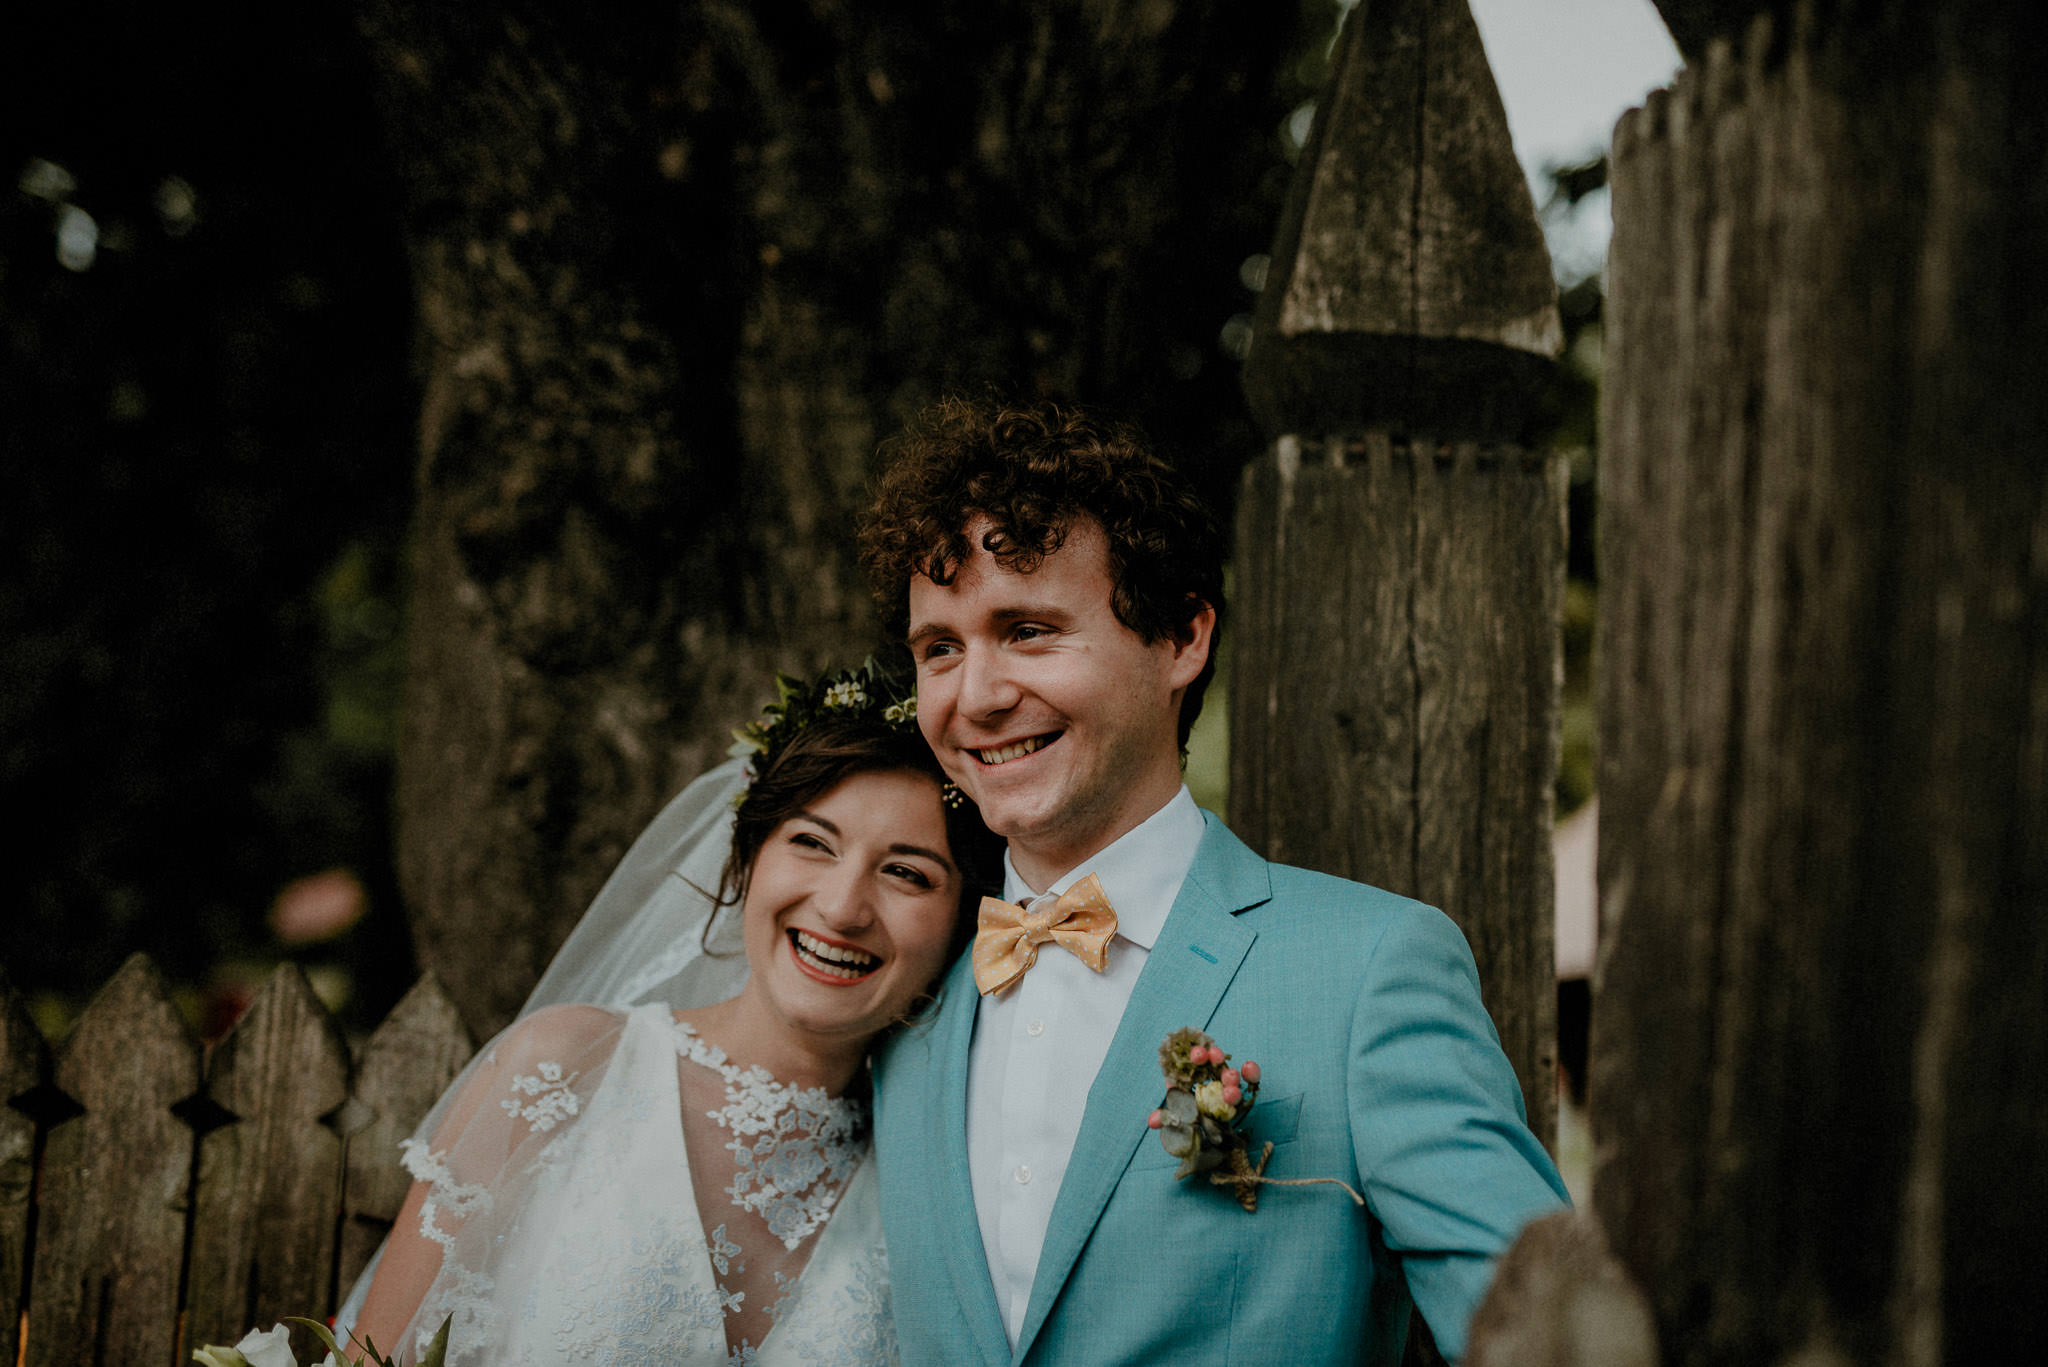 colourful wedding with happy bride and groom